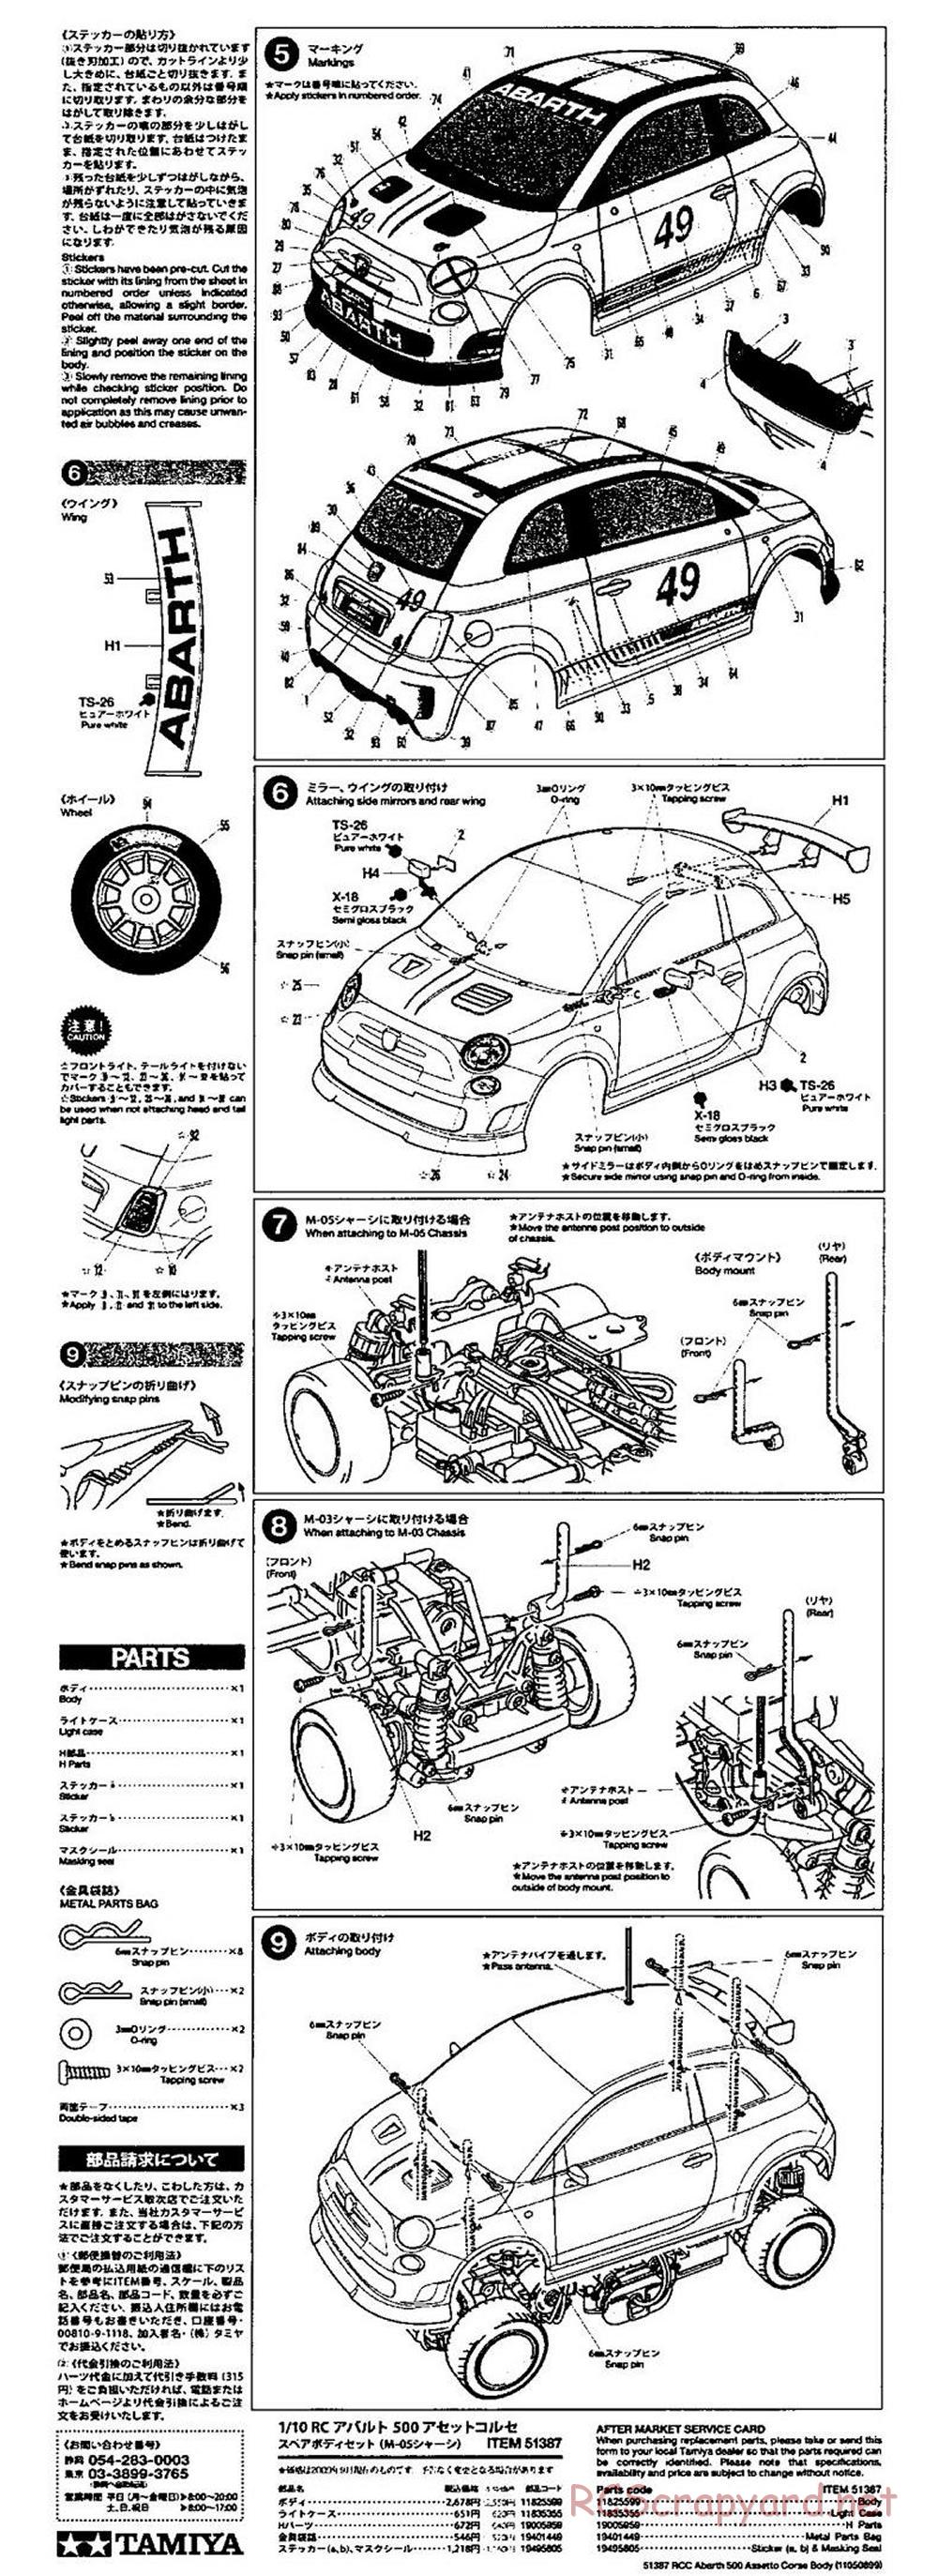 Tamiya - Abarth 500 Assetto Corse - M-05 Chassis - Body Manual - Page 2